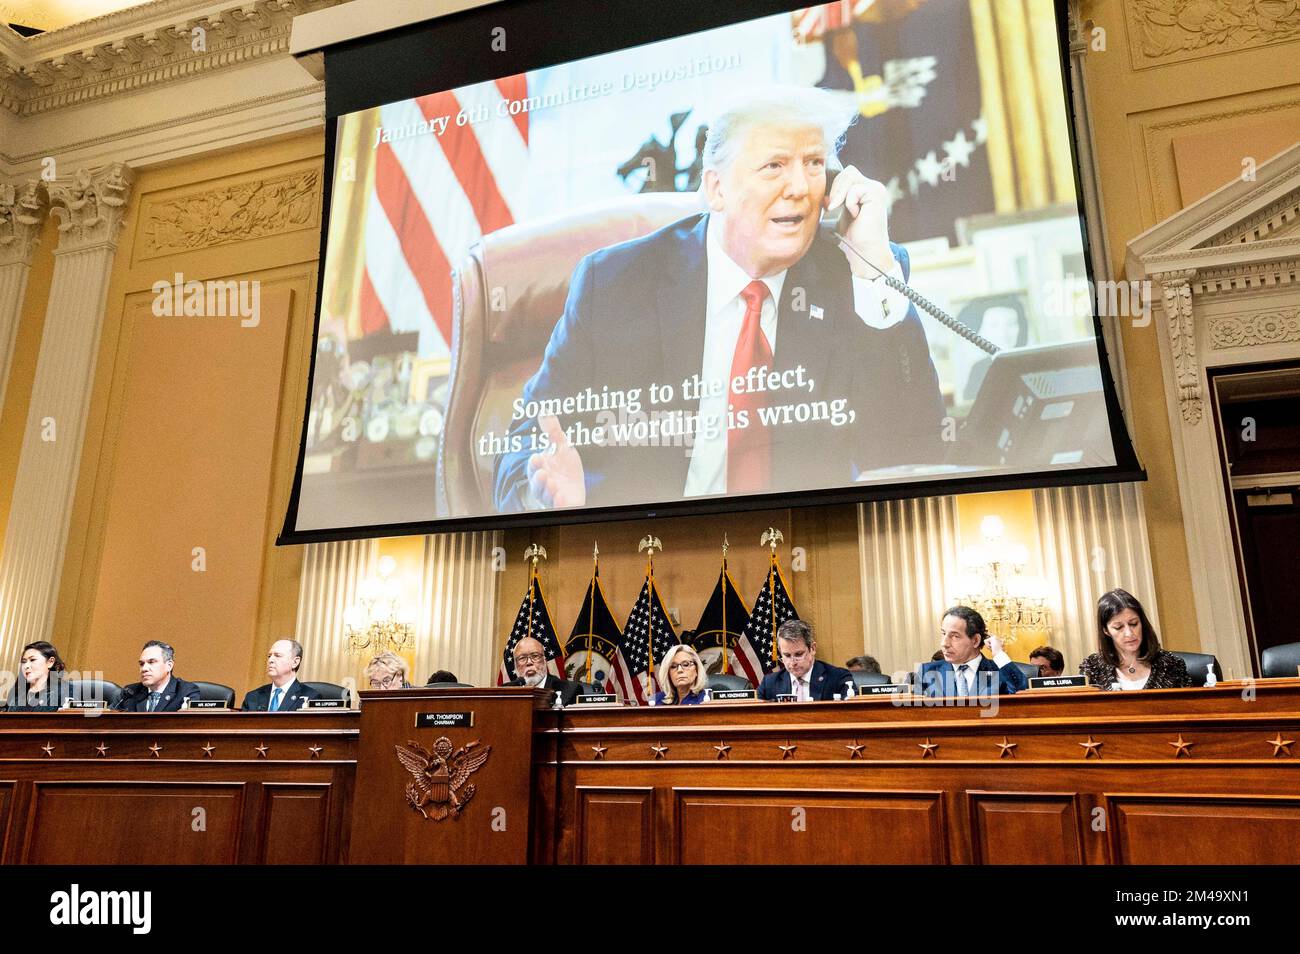 December 19, 2022, Washington, District of Columbia, USA: President DONALD TRUMP is displayed on a screen during a hearing of the Select Committee to Investigate the January 6th Attack on the US Capitol. The committee investigating the deadly Jan. 6 Capitol insurrection will complete its 17-month probe with votes on recommendations for the first-ever criminal prosecution of a former president, with offenses including insurrection. (Credit Image: © Michael Brochstein/ZUMA Press Wire) Stock Photo